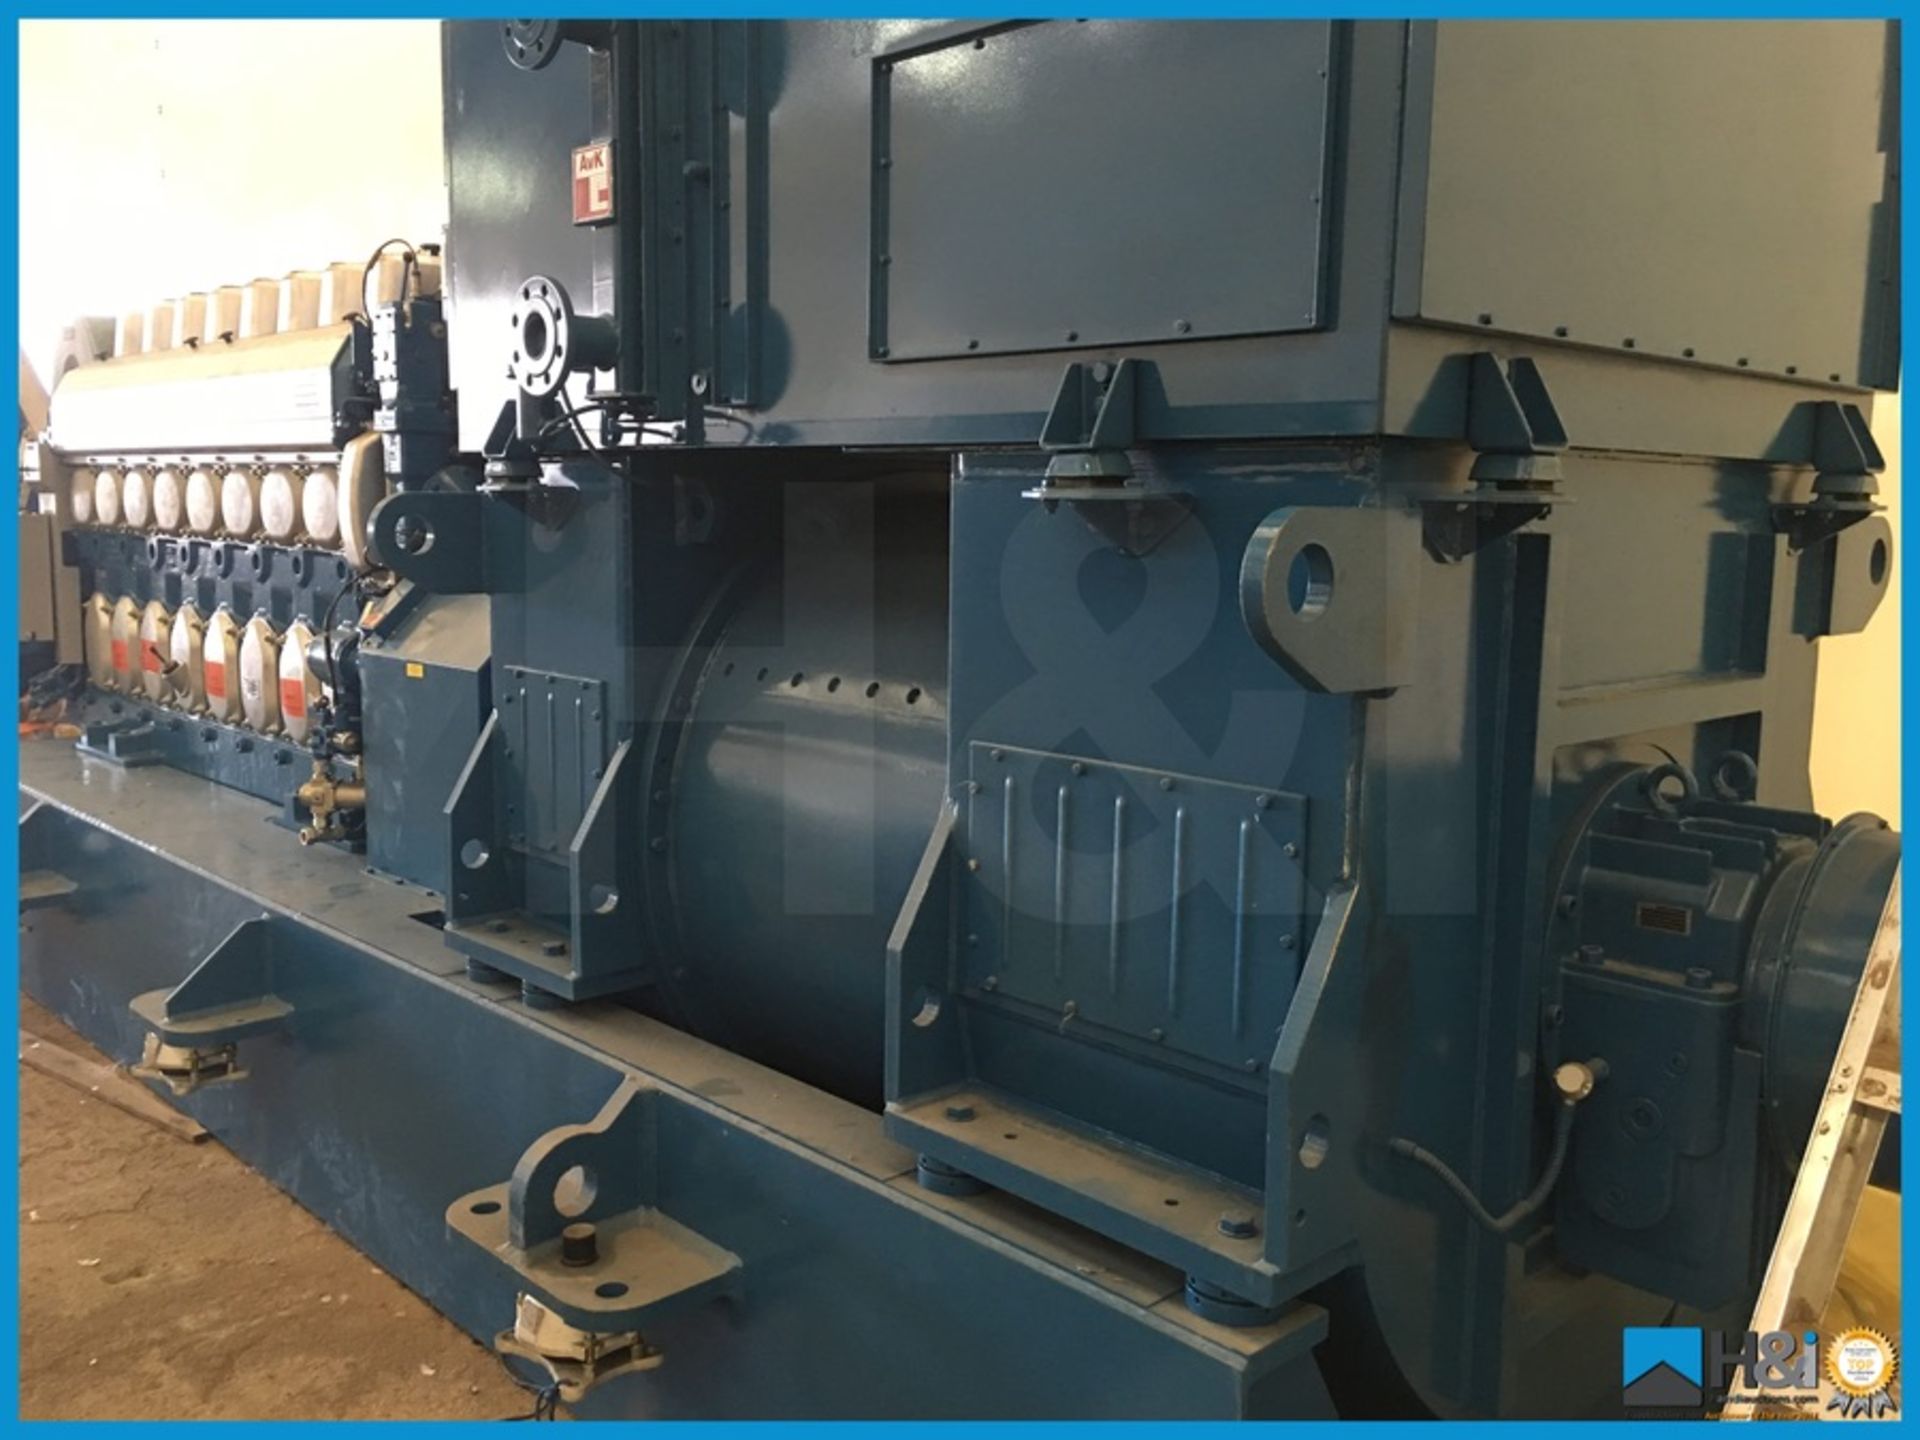 Unused Wartsila 8L20 high capacity diesel generator manufactured in 2013 for a large marine - Image 18 of 19